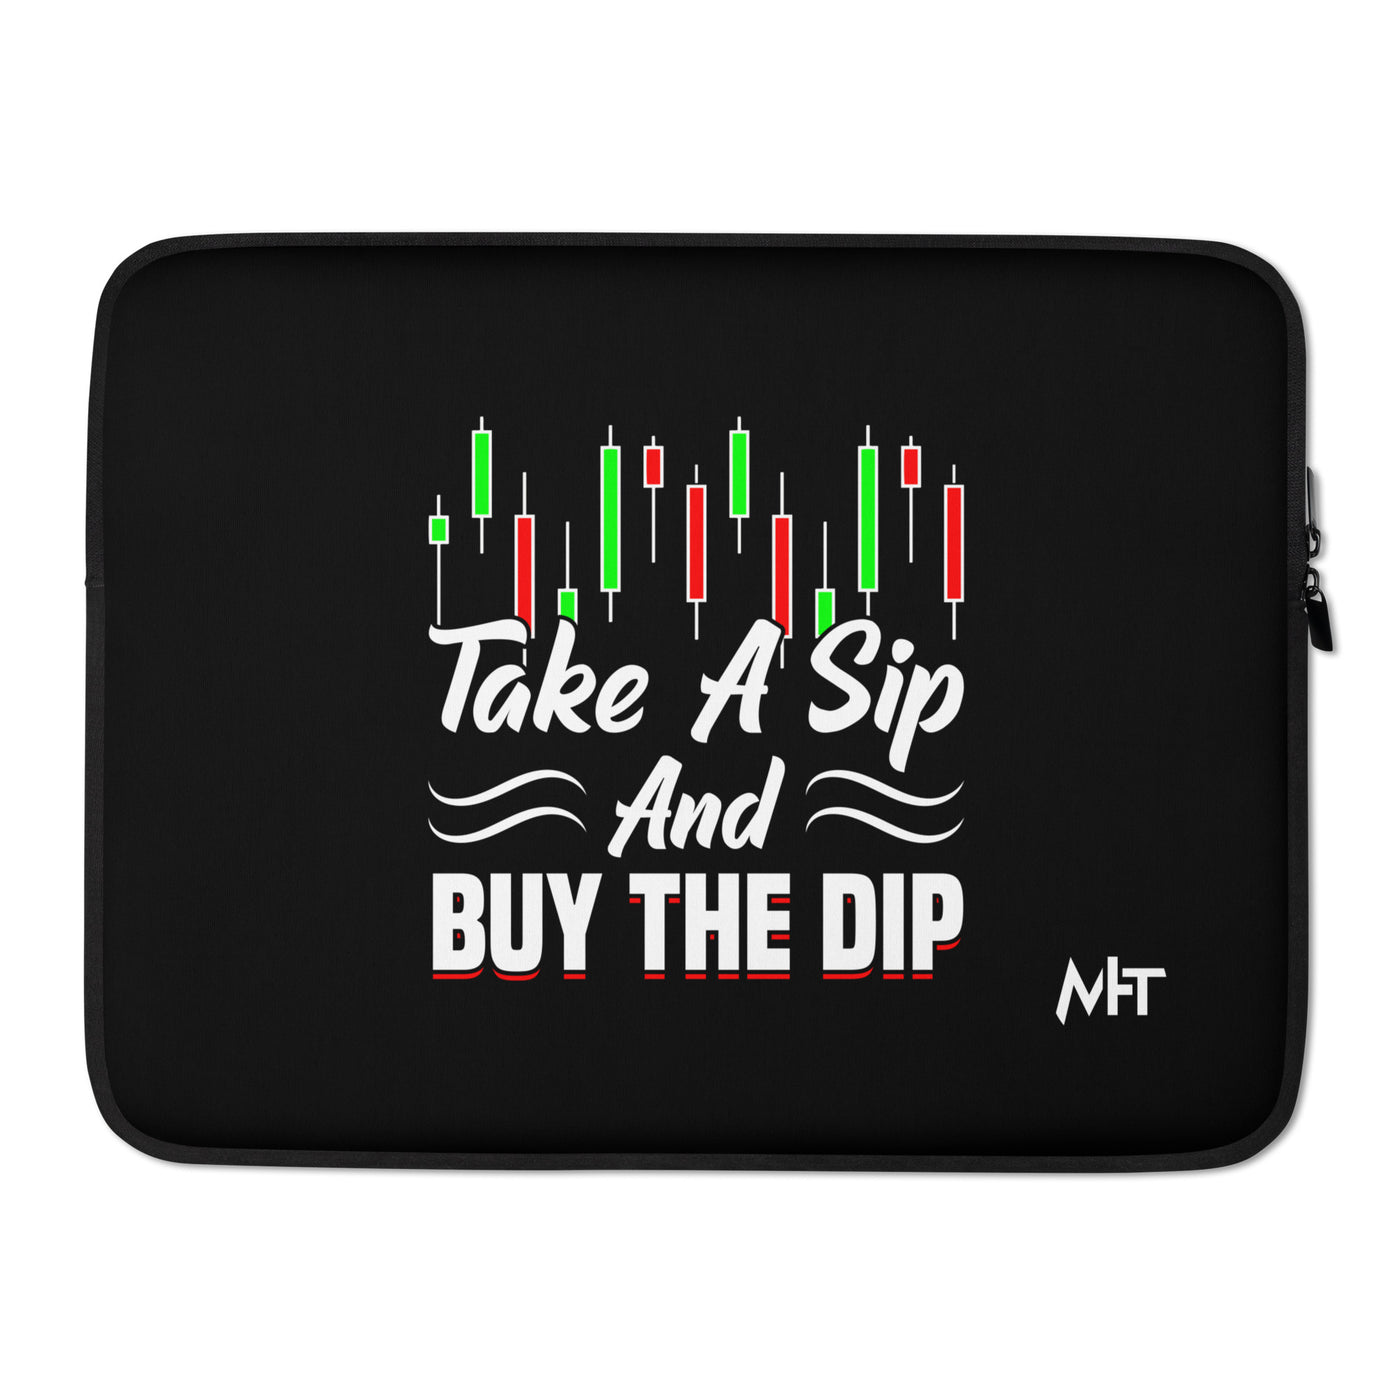 Take a Sip and Buy the Dip - Laptop Sleeve